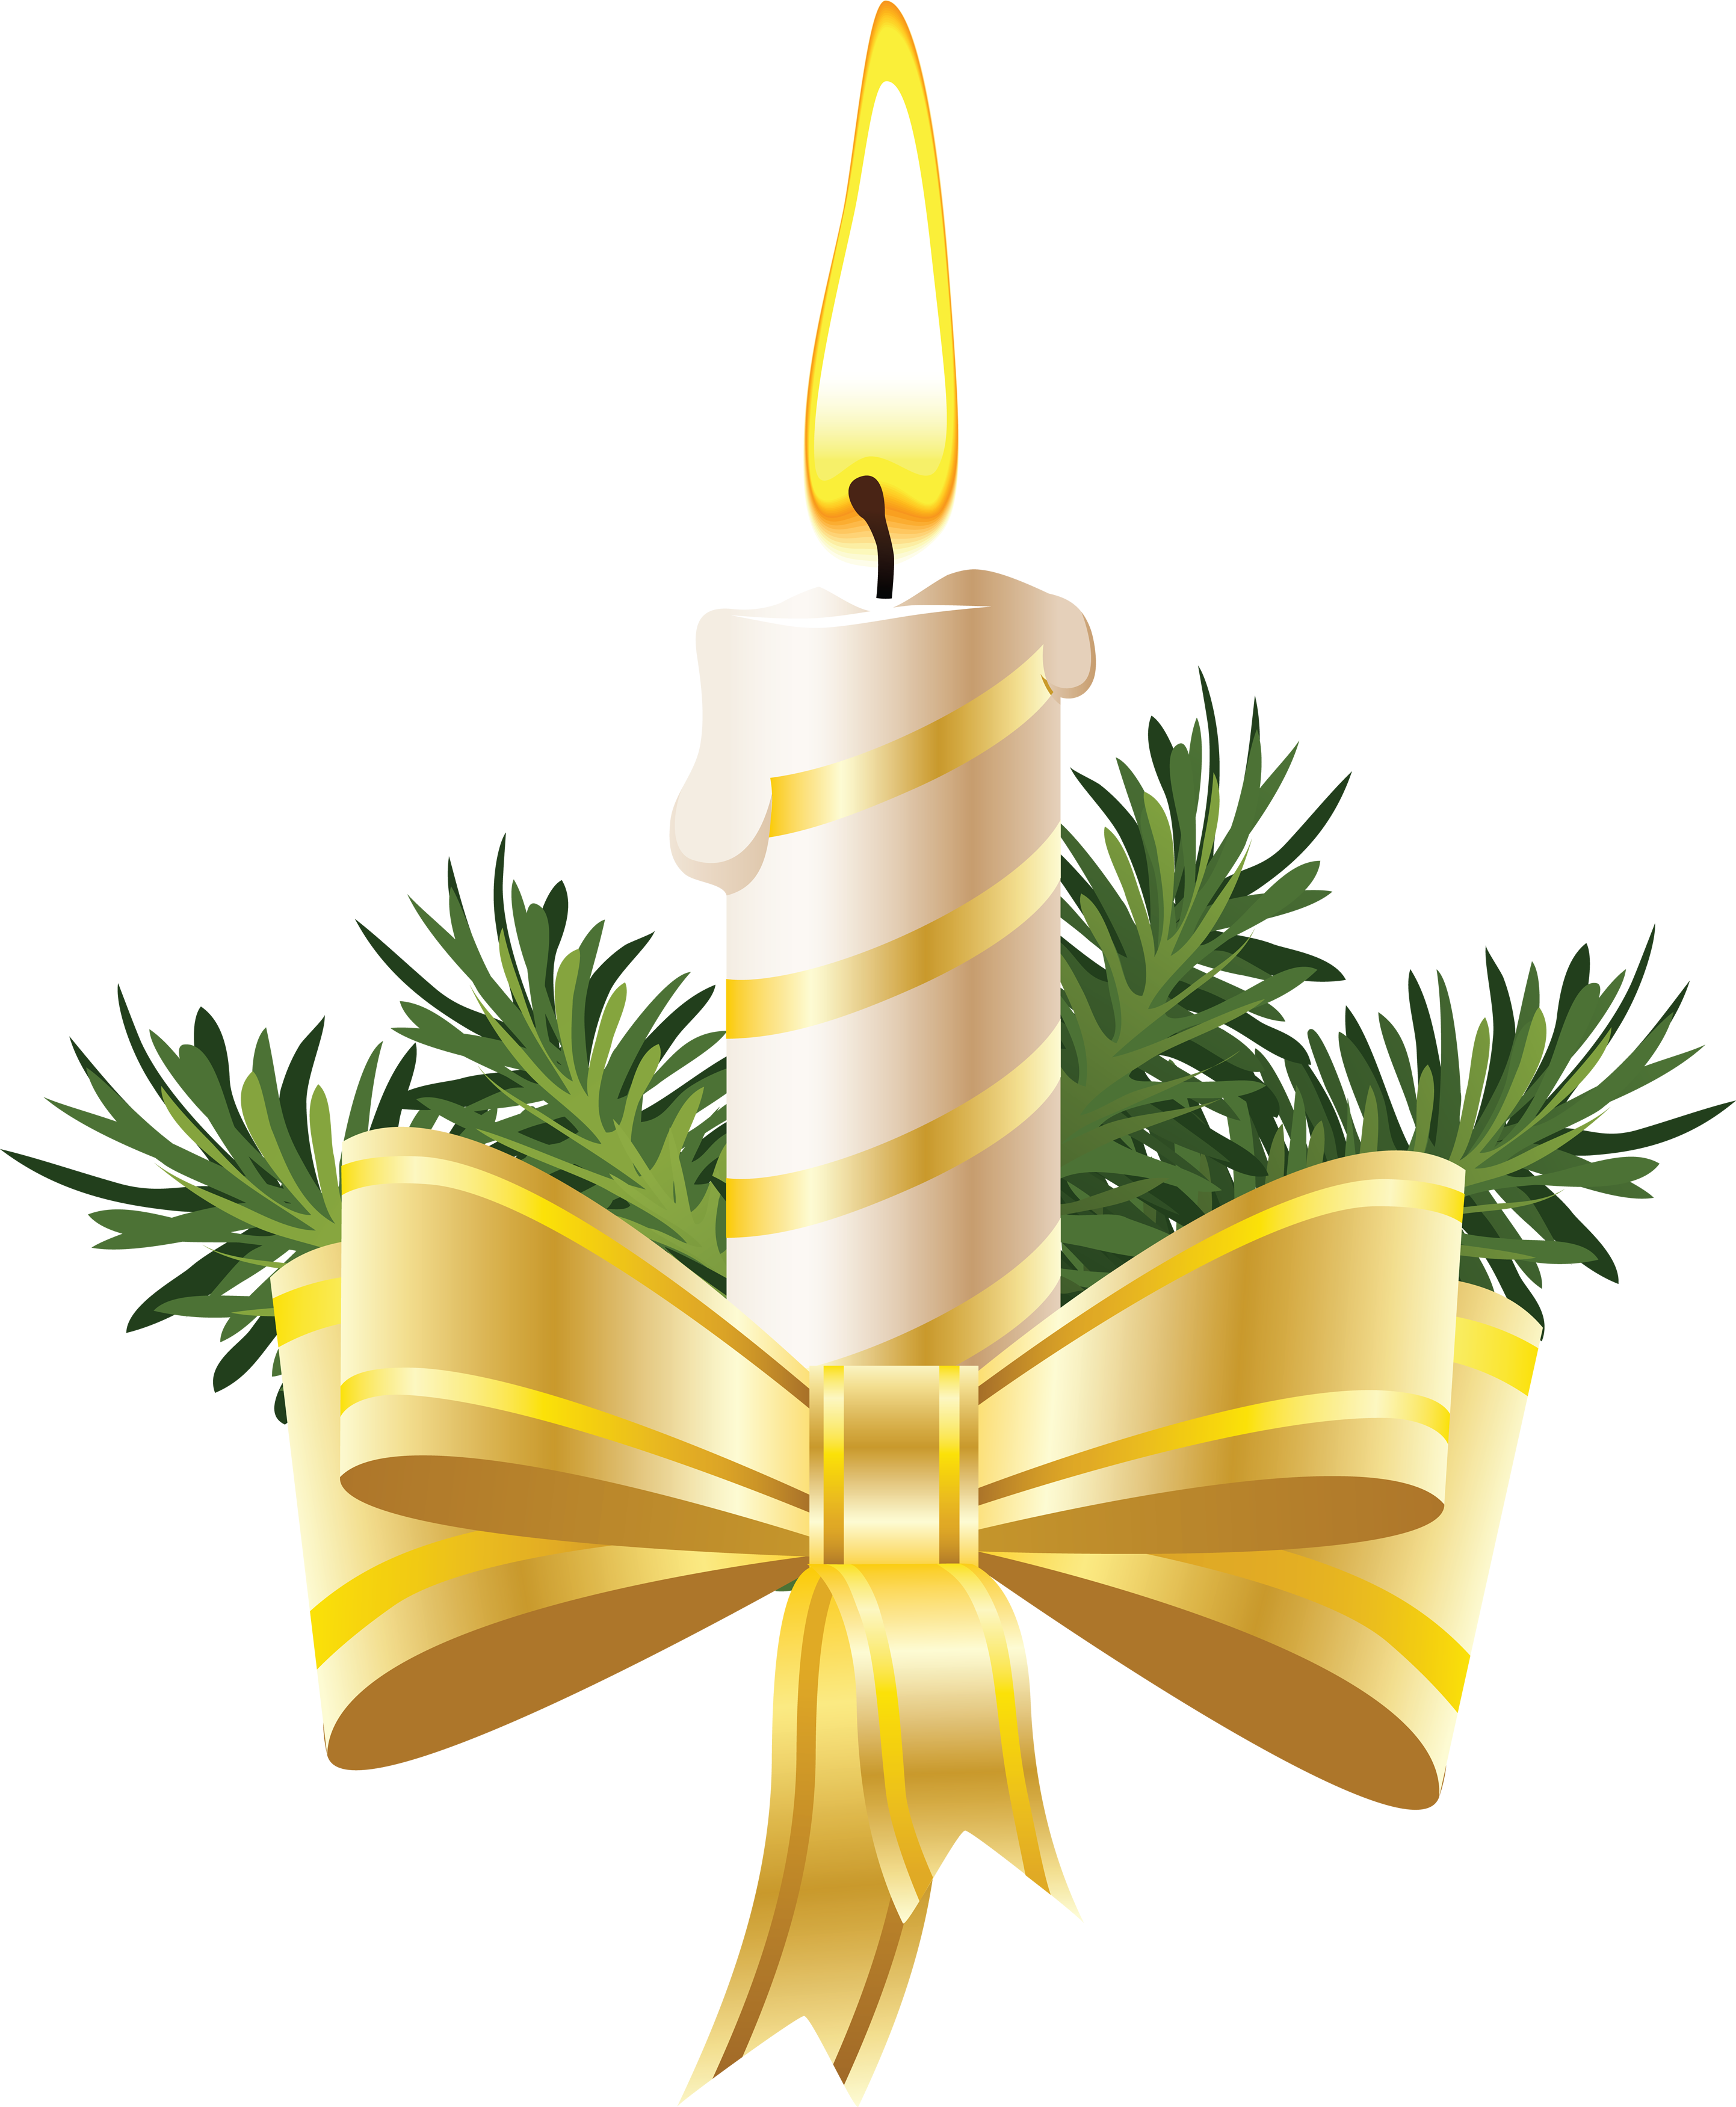 Candle  PNG HD-PlusPNG.com-80